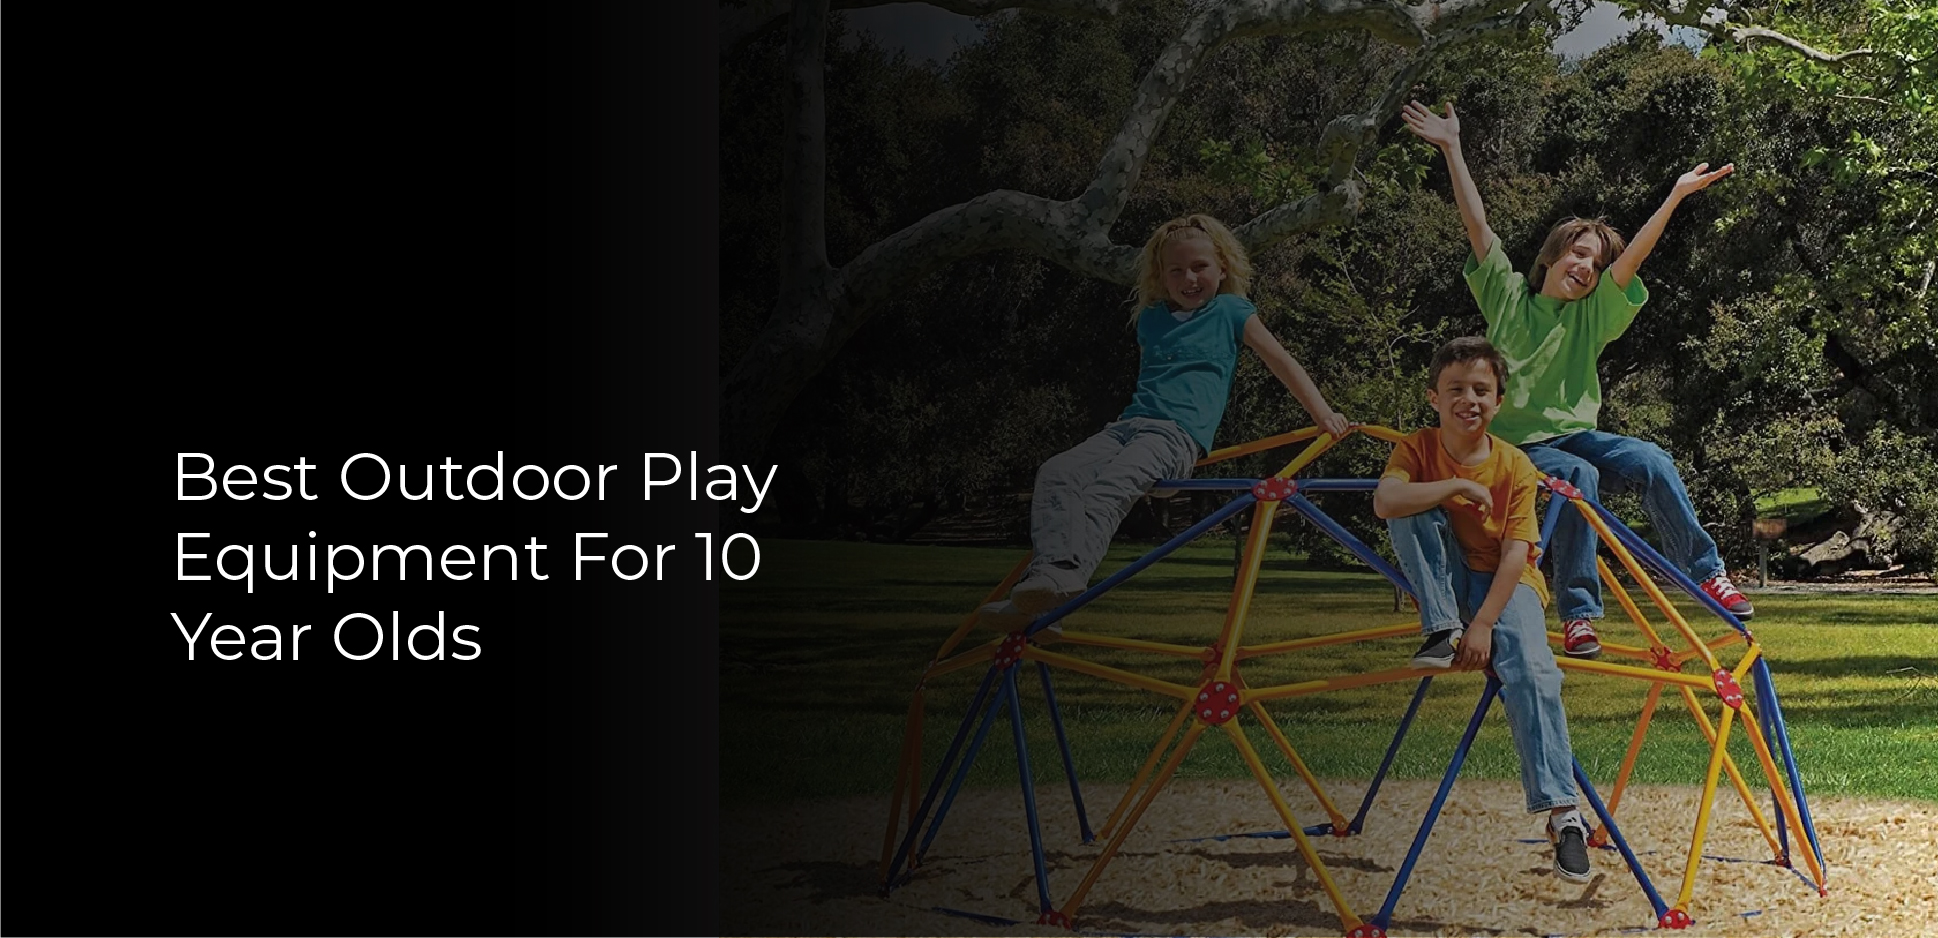 Best Outdoor Play Equipment For 10 Year Olds